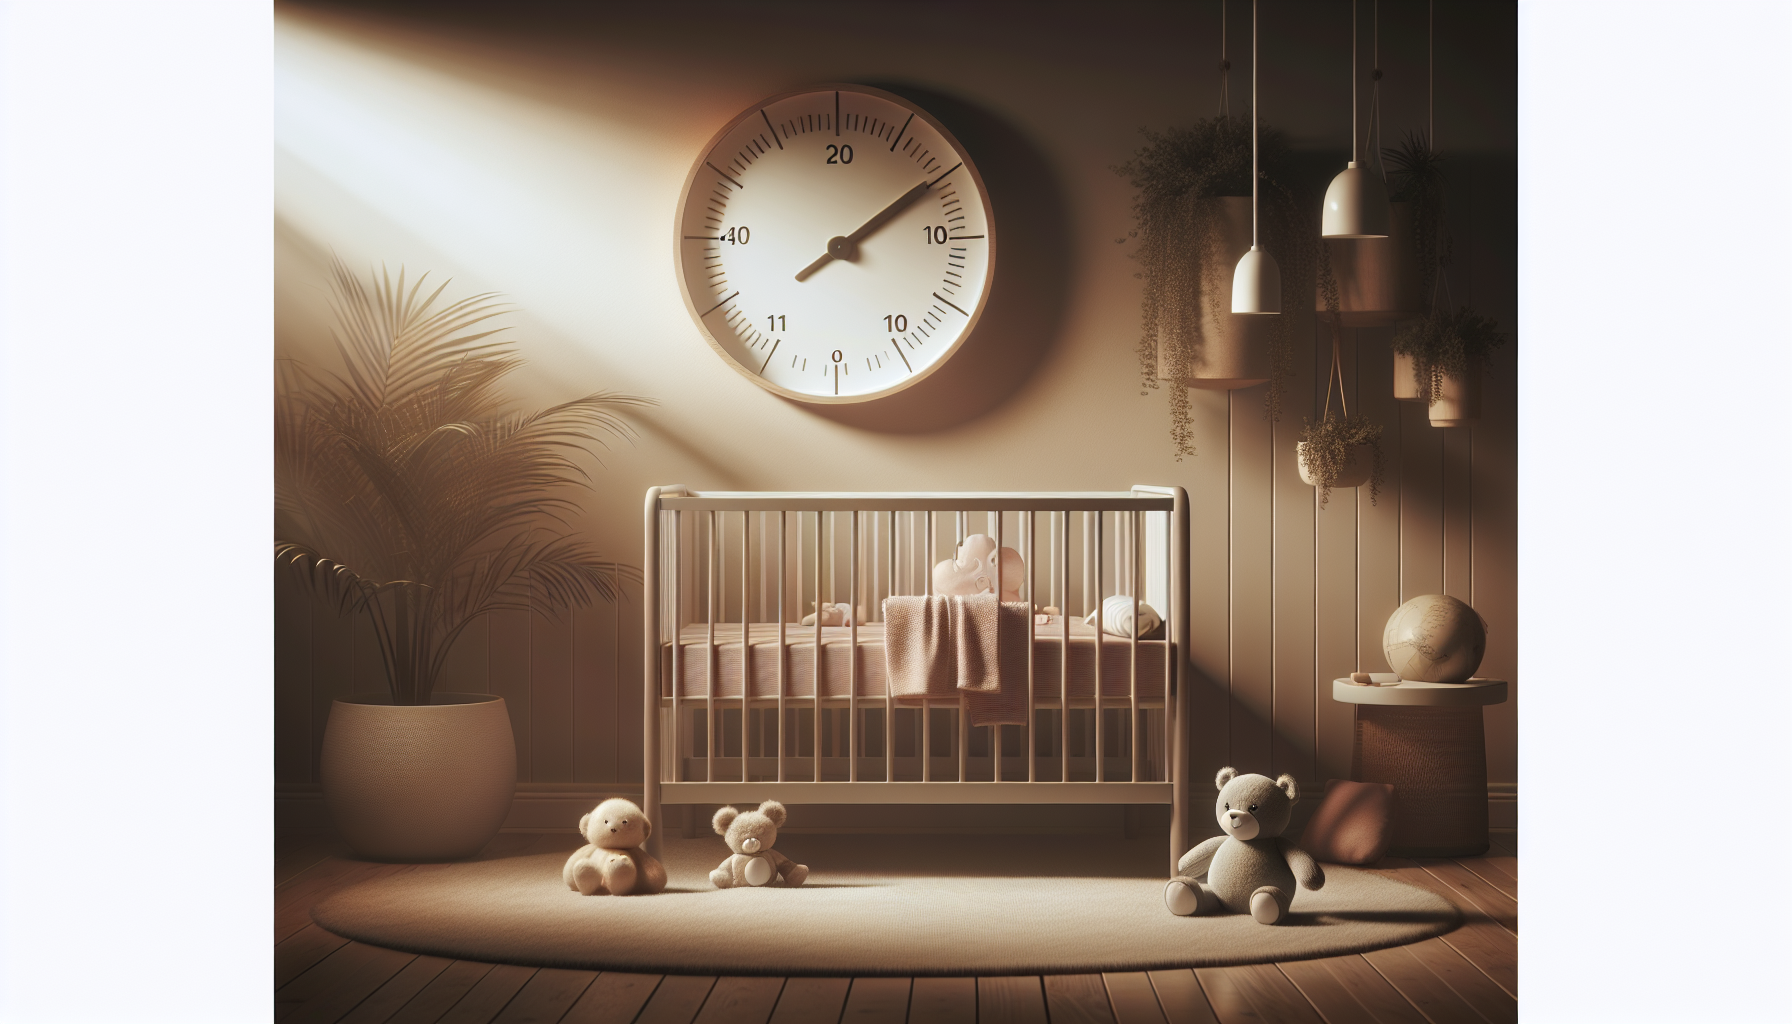 Maintaining safe room temperature for baby